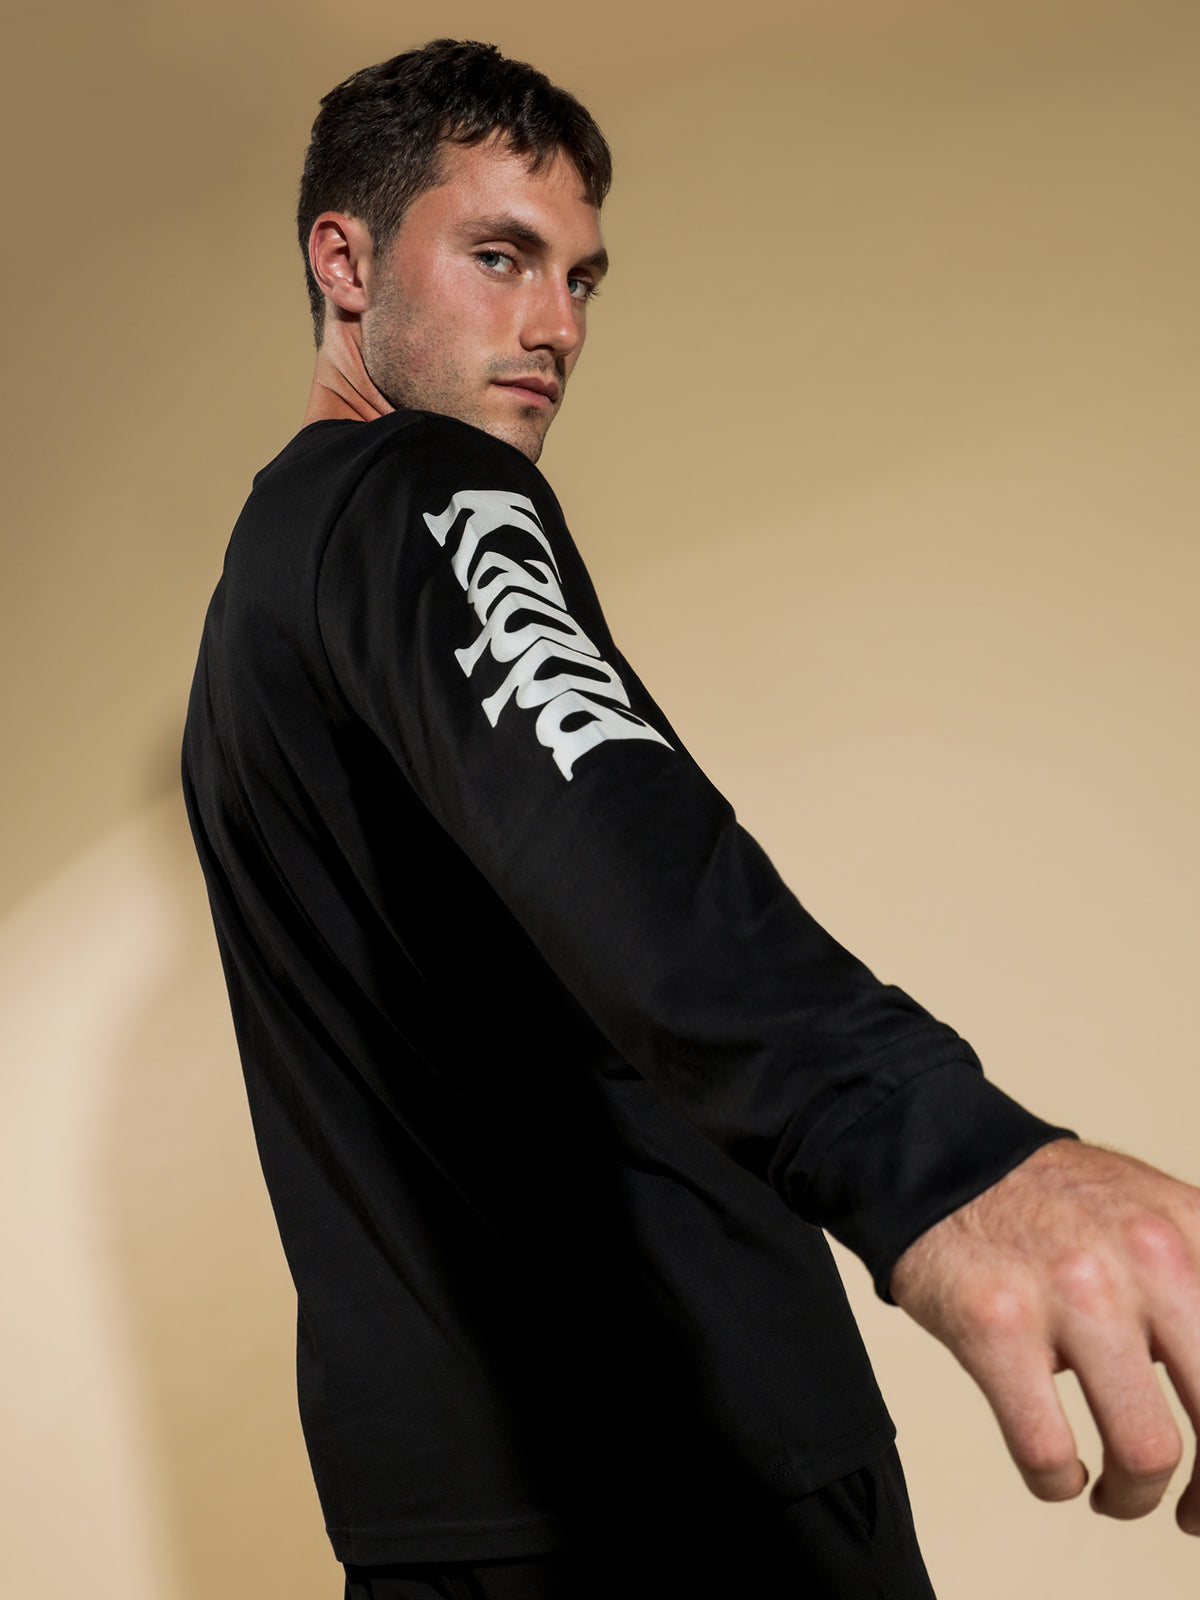 Authentic Defer 2 Man Long Sleeve T-Shirt in Black